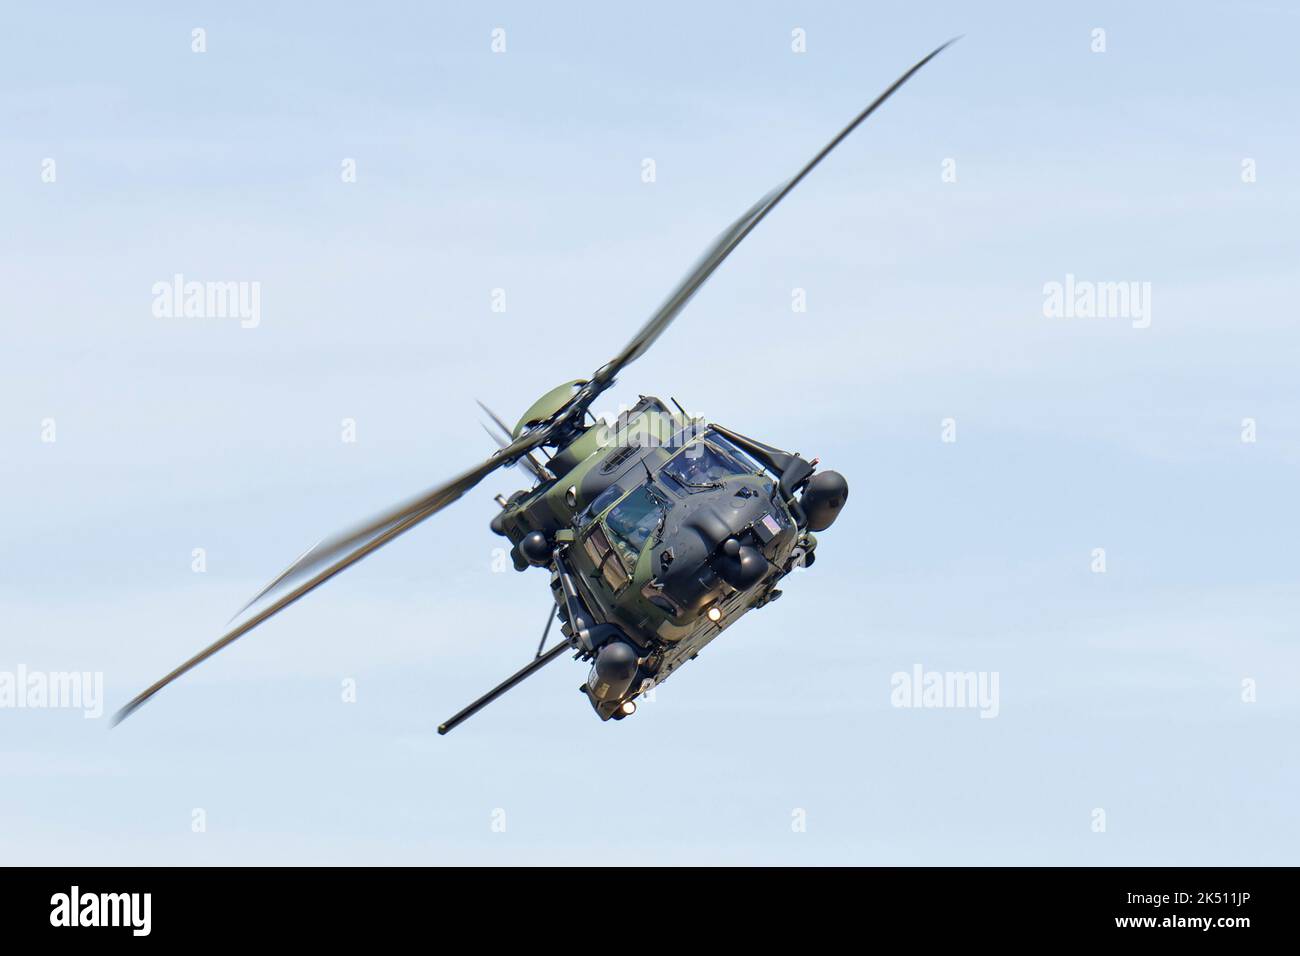 NH Industries NH90 Tactical Troop Transport Helicopter of the German Army puts on an impressive flying display at the Royal International Air Tattoo Stock Photo